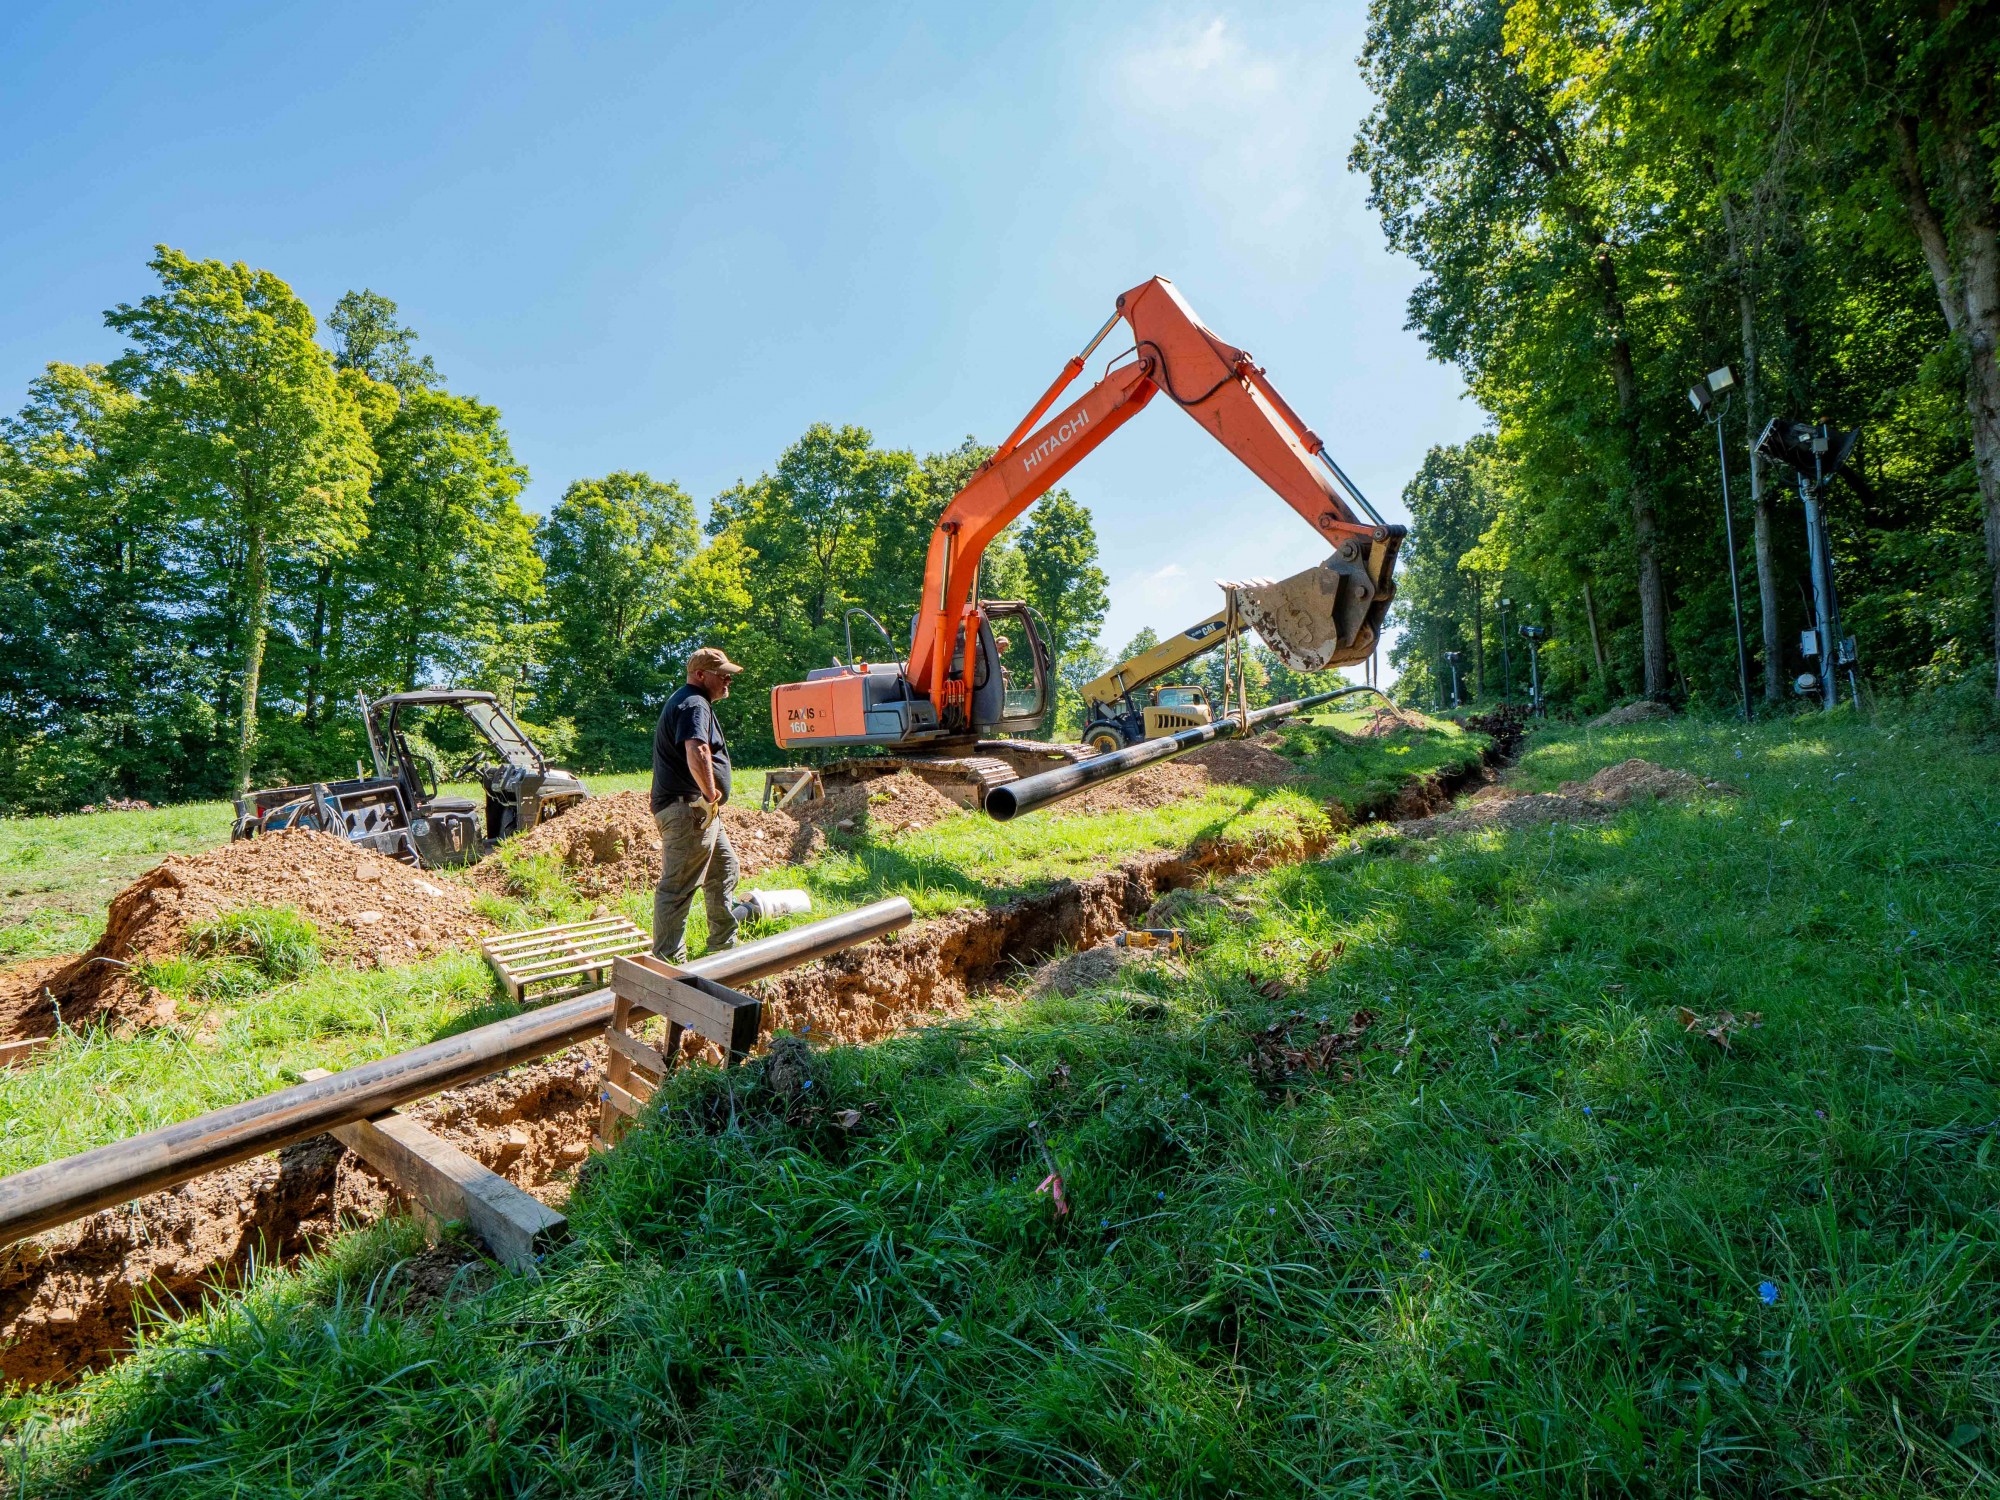 Steel Pipeline Placement for Snowmaking Improvements on West Woods Trail at Snow Trails Ohio